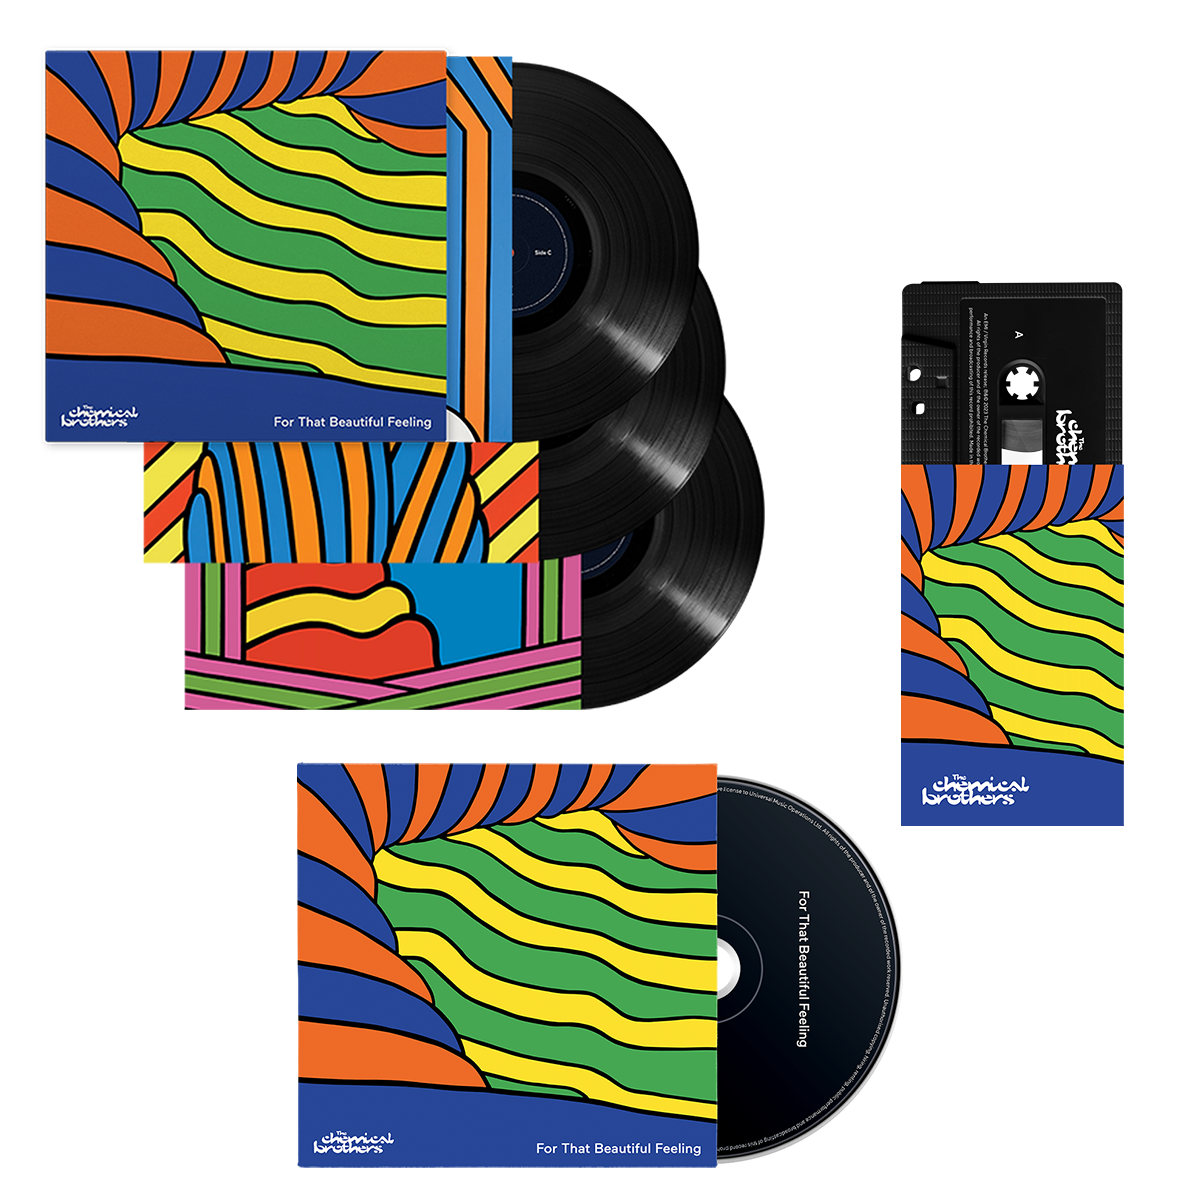 For That Beautiful Feeling 3LP, CD and Cassette